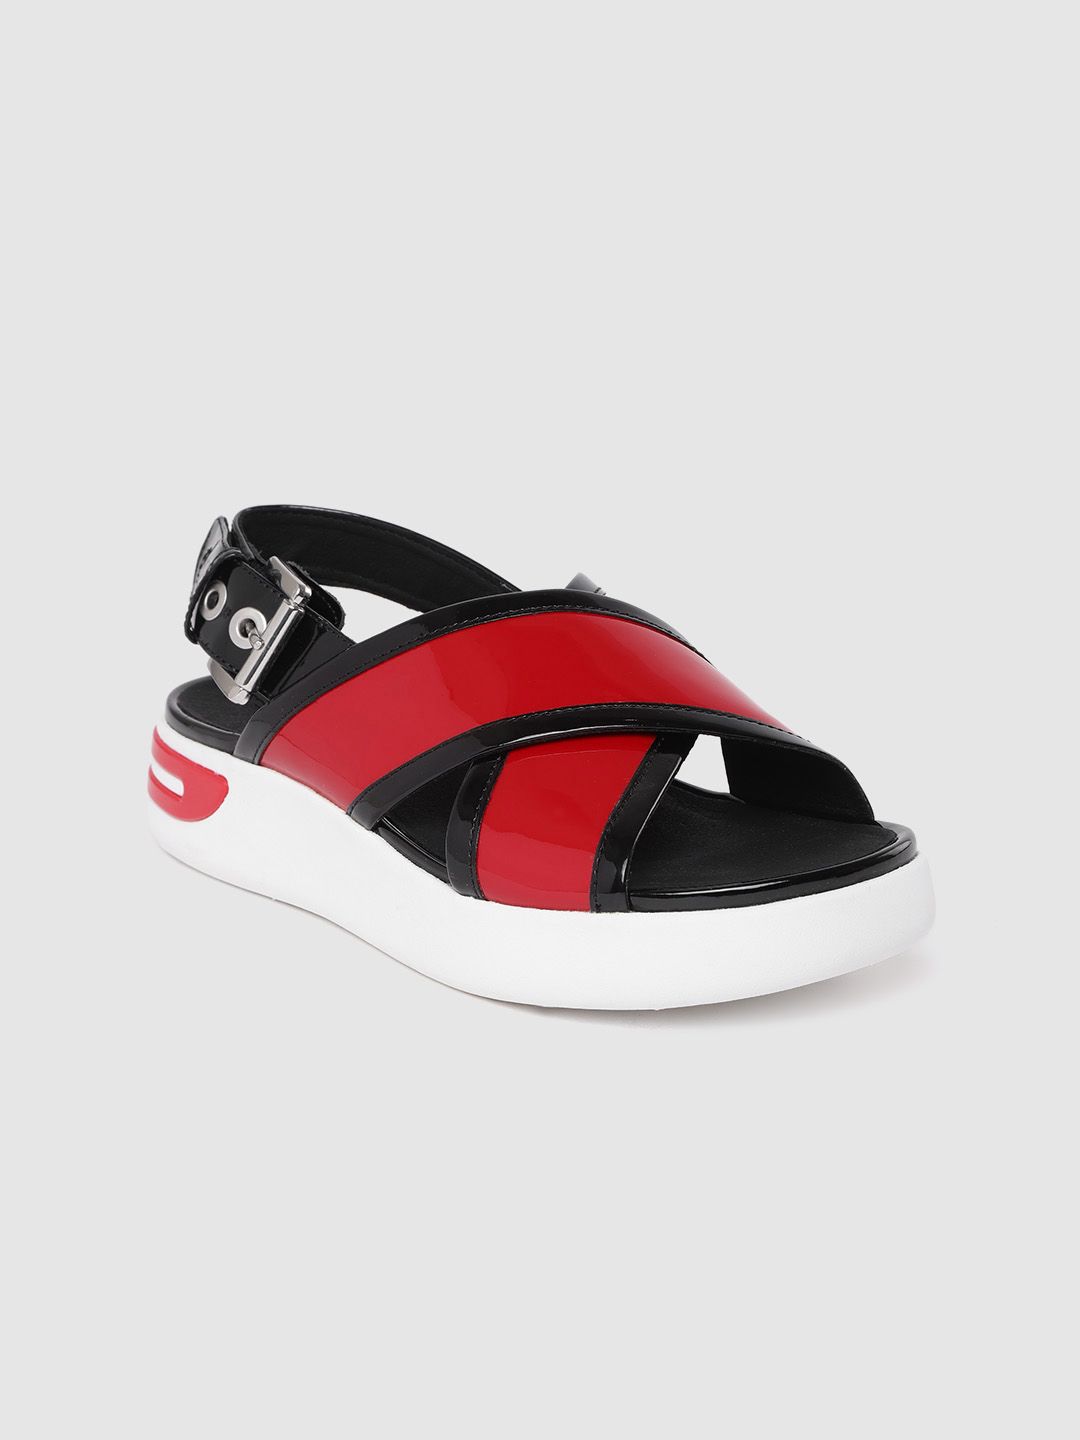 Geox Women Red & Black Solid Flatforms Price in India